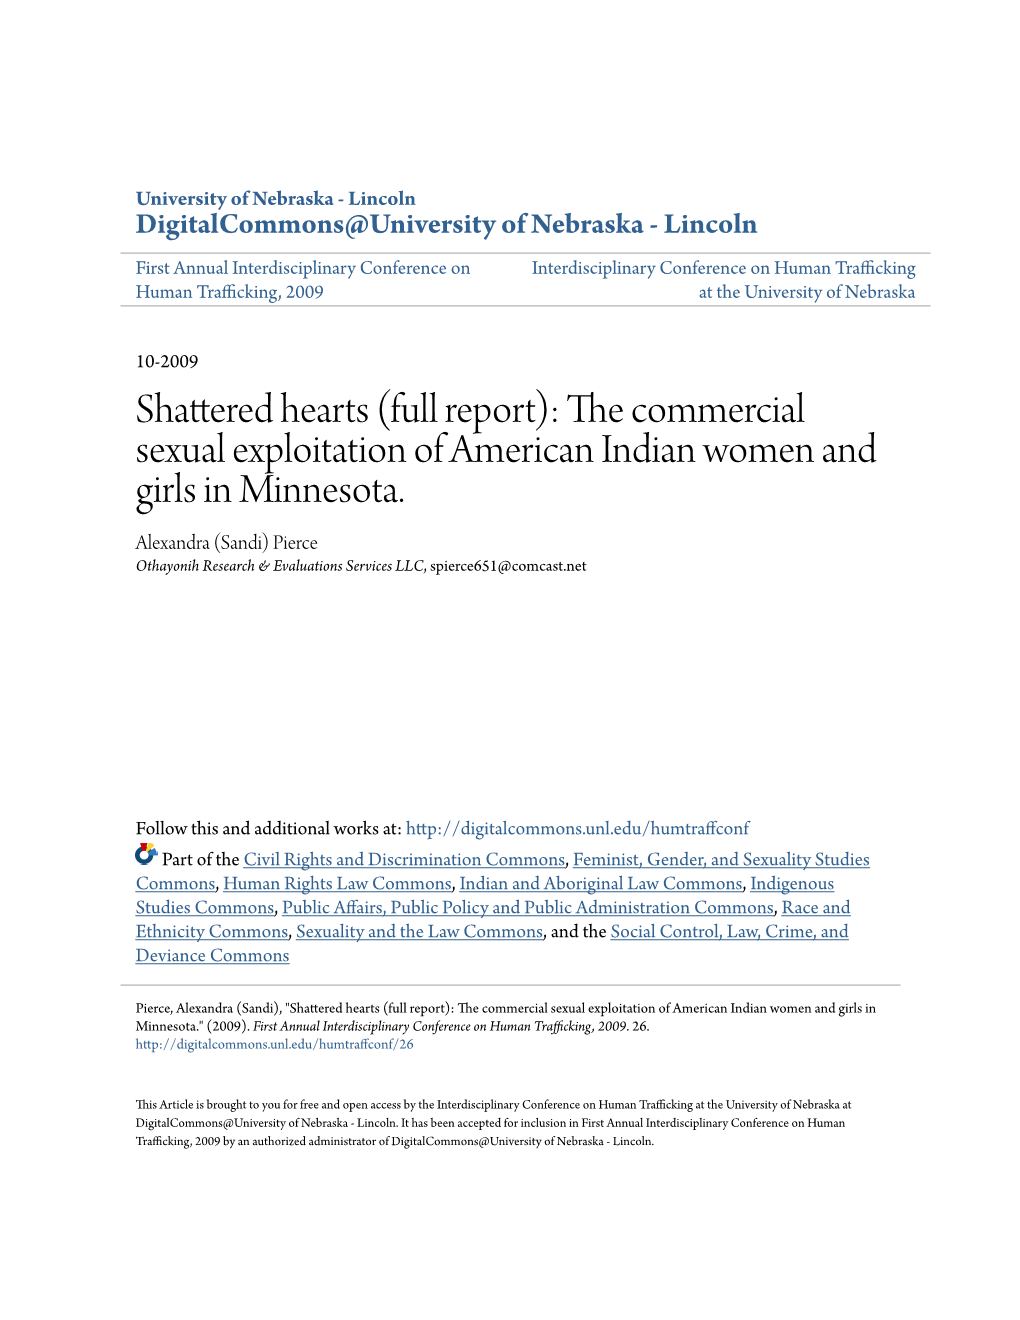 Shattered Hearts (Full Report): the Commercial Sexual Exploitation of American Indian Women and Girls in Minnesota